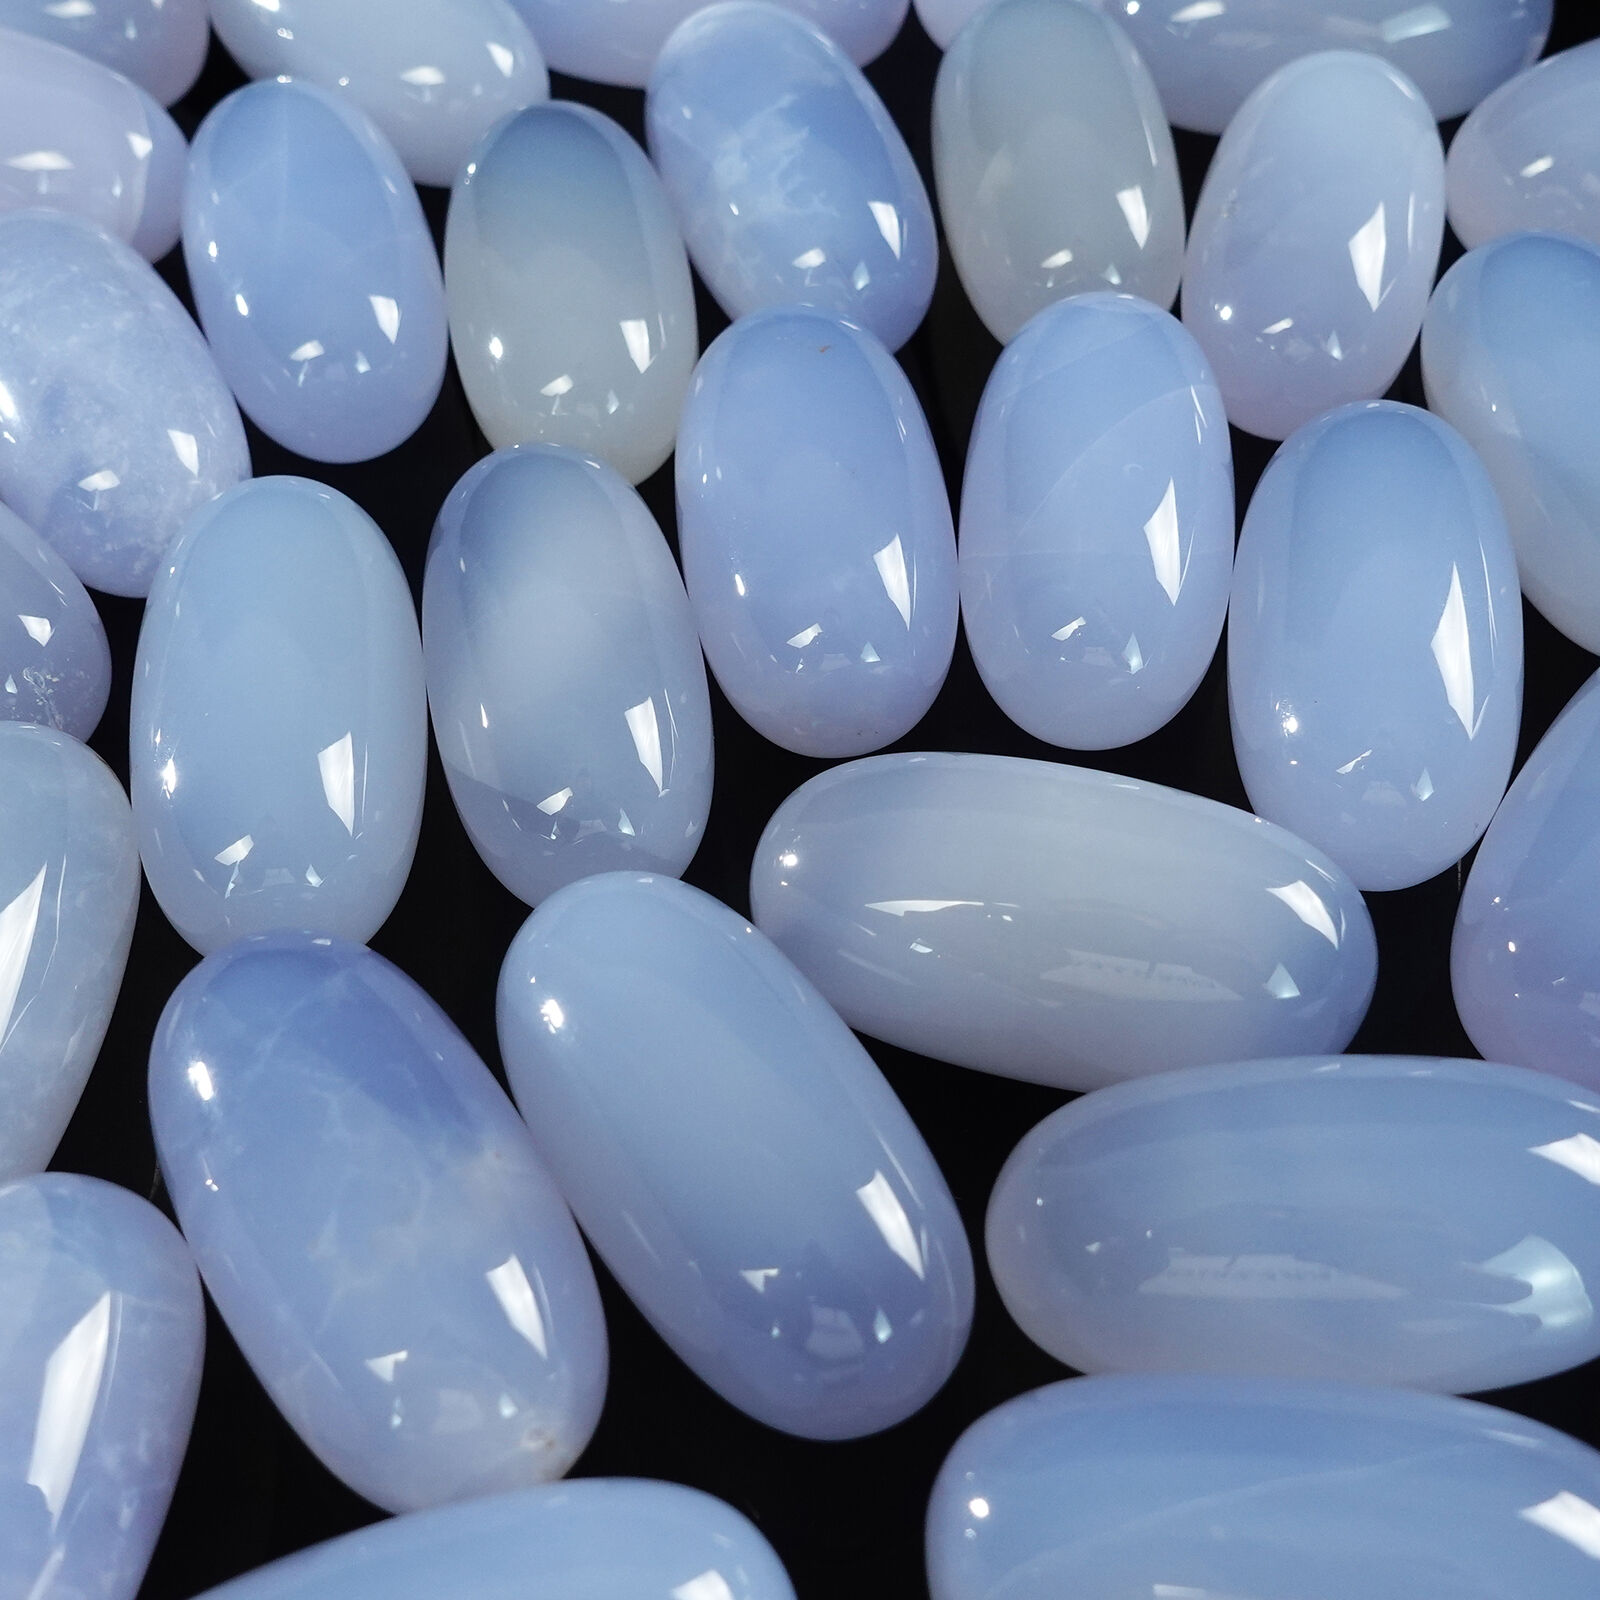 Blue Chalcedony Oval Egg Energy Stone Natural Crystal Healing Meditation 20x40mm